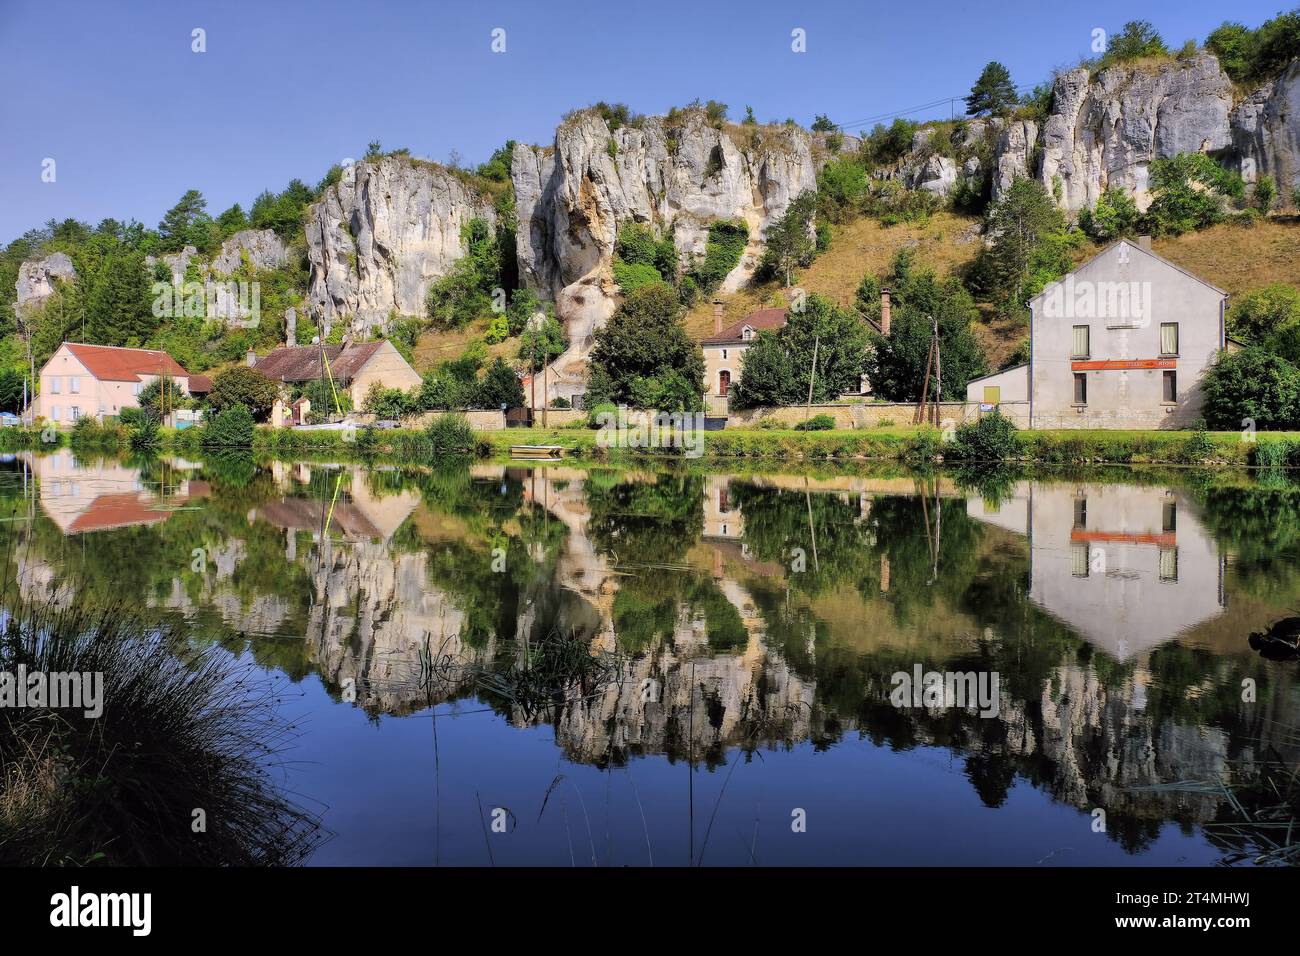 Les Rochers du Saussois (rock cliffs) and River Yonne with mirror reflections at commune of Merry sur Yonne, Burgundy, France Stock Photo